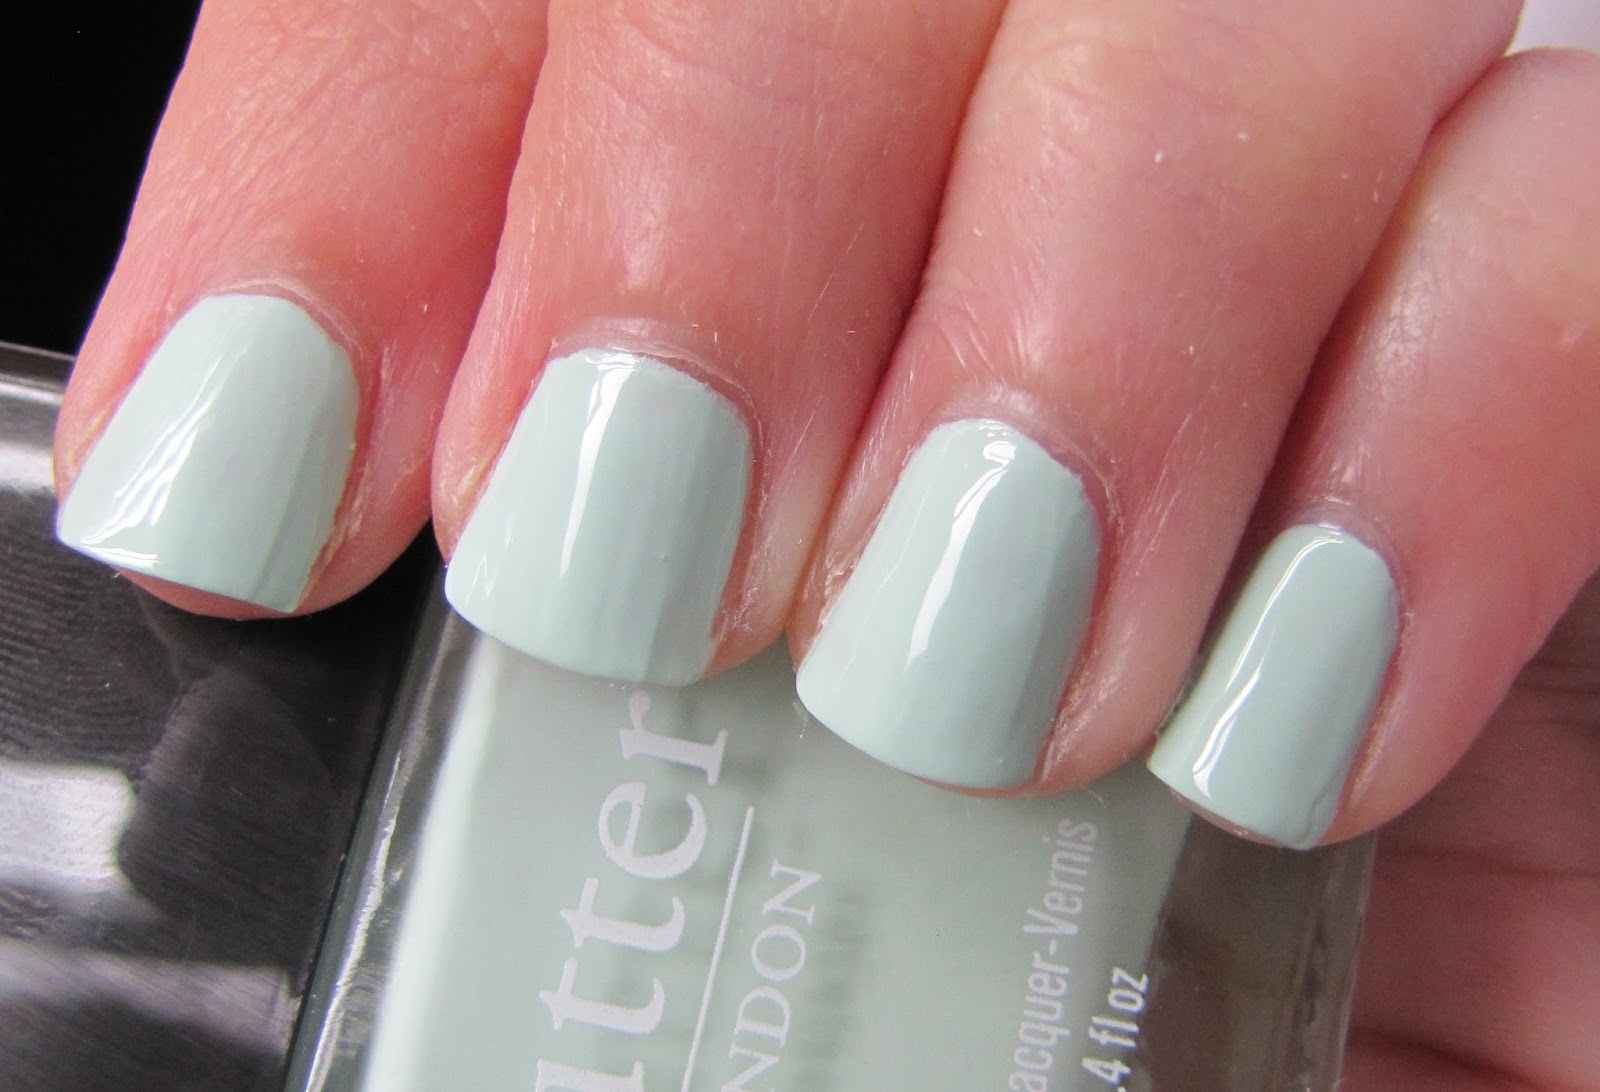 7. Butter London Nail Lacquer in "Fiver" - wide 5